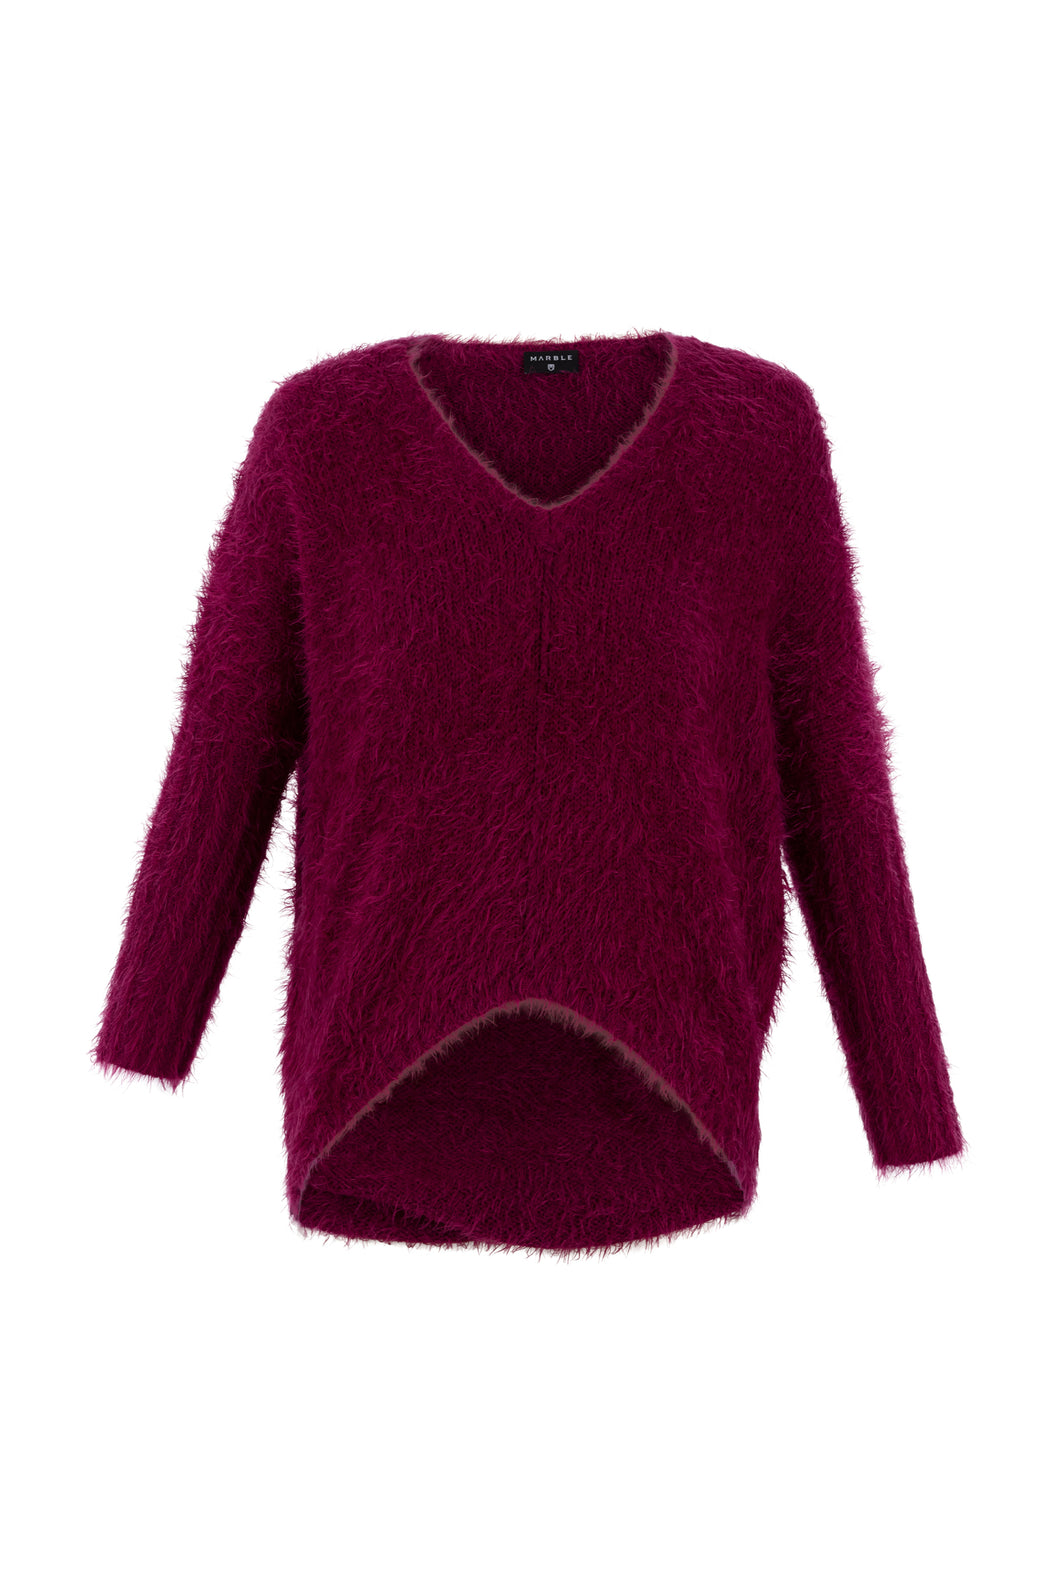 MARBLE FASHIONS 7136 SWEATER COLOUR 205 - BERRY